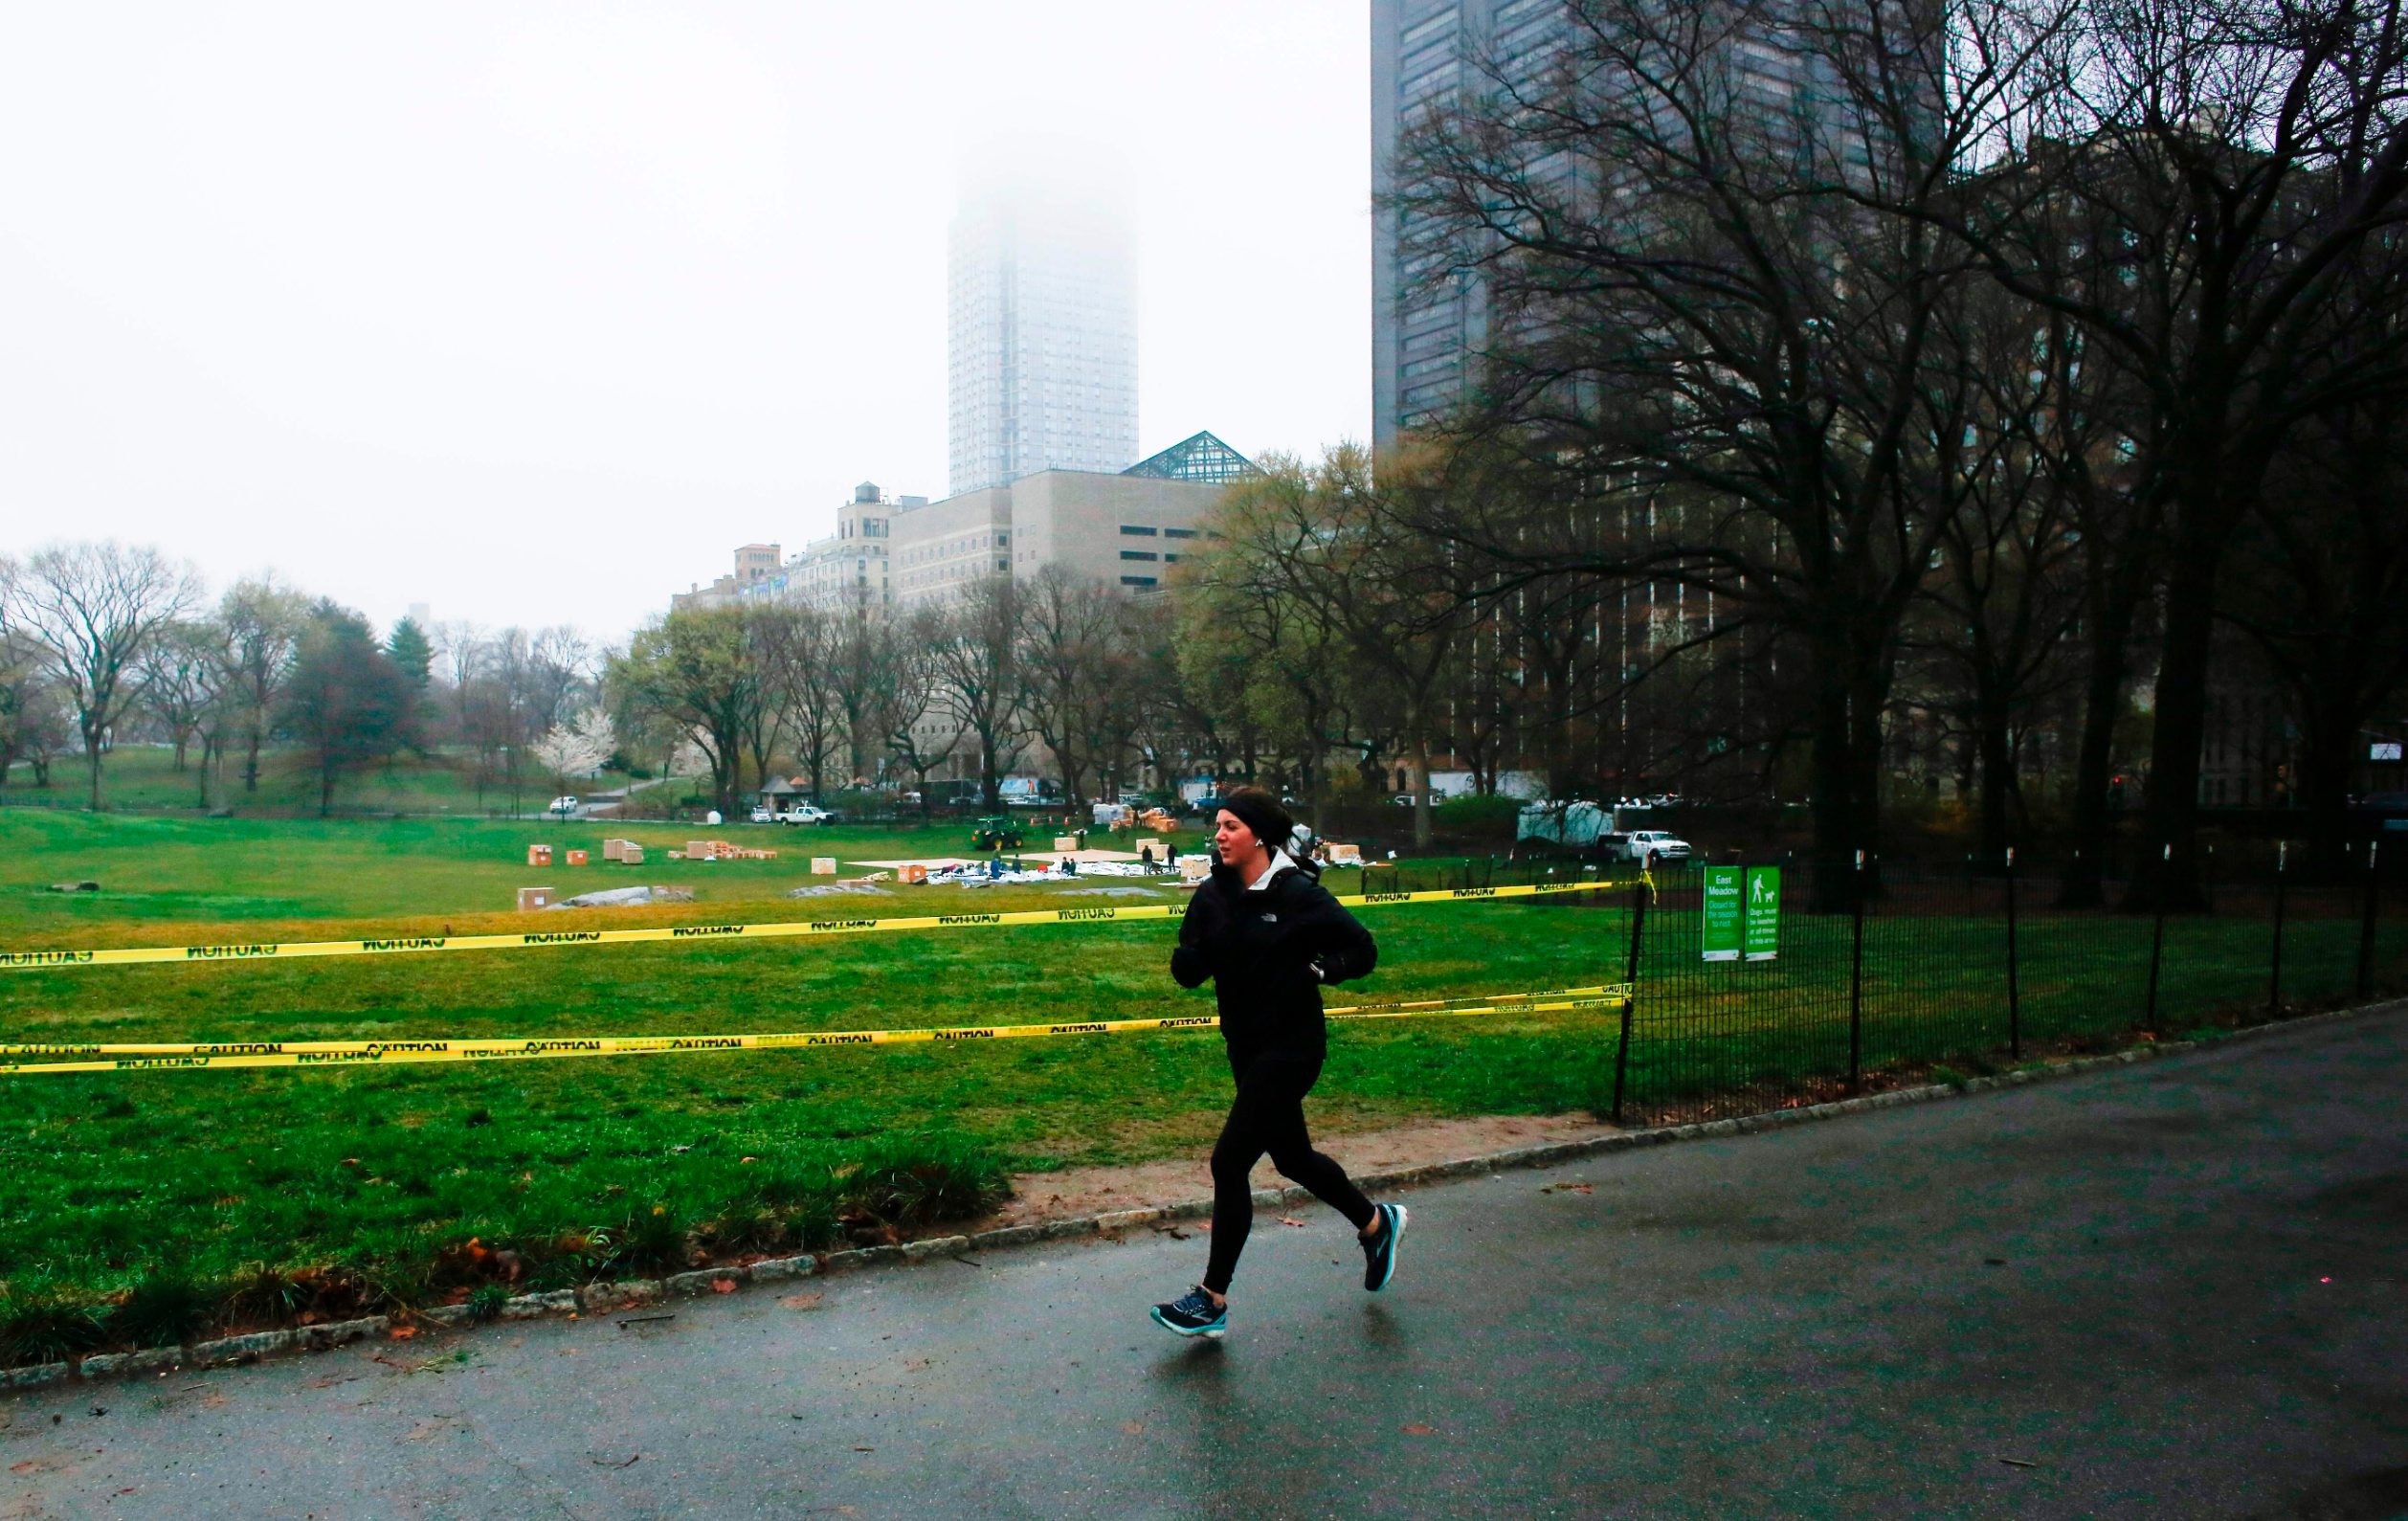 A woman jogs by Central Park as workers set up a camp in front of Mount Sinai West Hospital on March 29, 2020 in New York City. - A senior US scientist issued a cautious prediction March 29, 2020 that the novel coronavirus could claim 100,000 to 200,000 lives in the United States. Dr. Anthony Fauci, who leads research into infectious diseases at the National Institutes of Health, told CNN that models predicting a million or more deaths were 